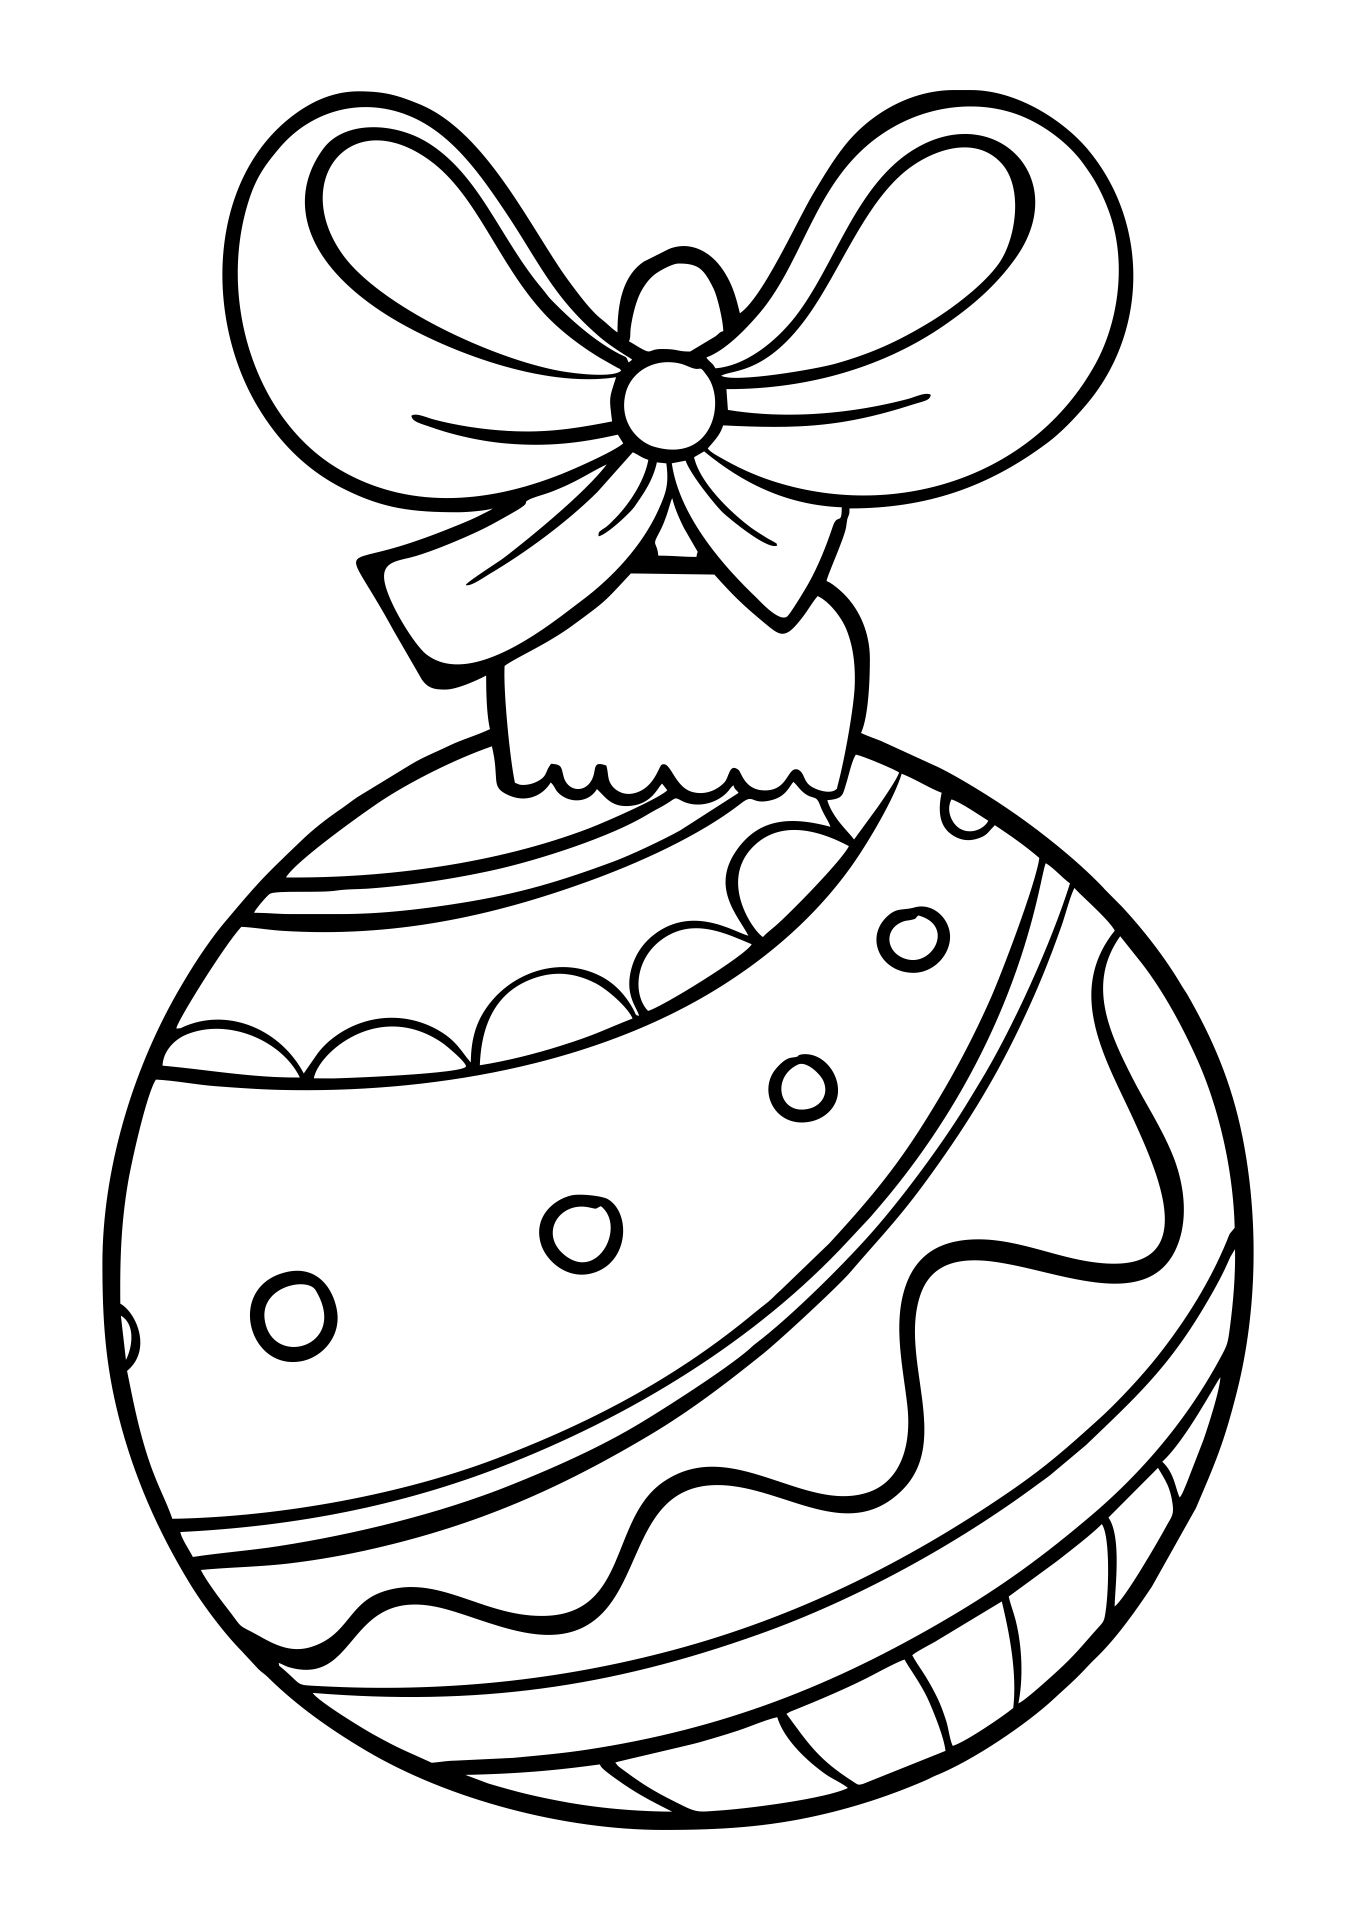 Free Printable Ornament Coloring Pages - Printable Word Searches